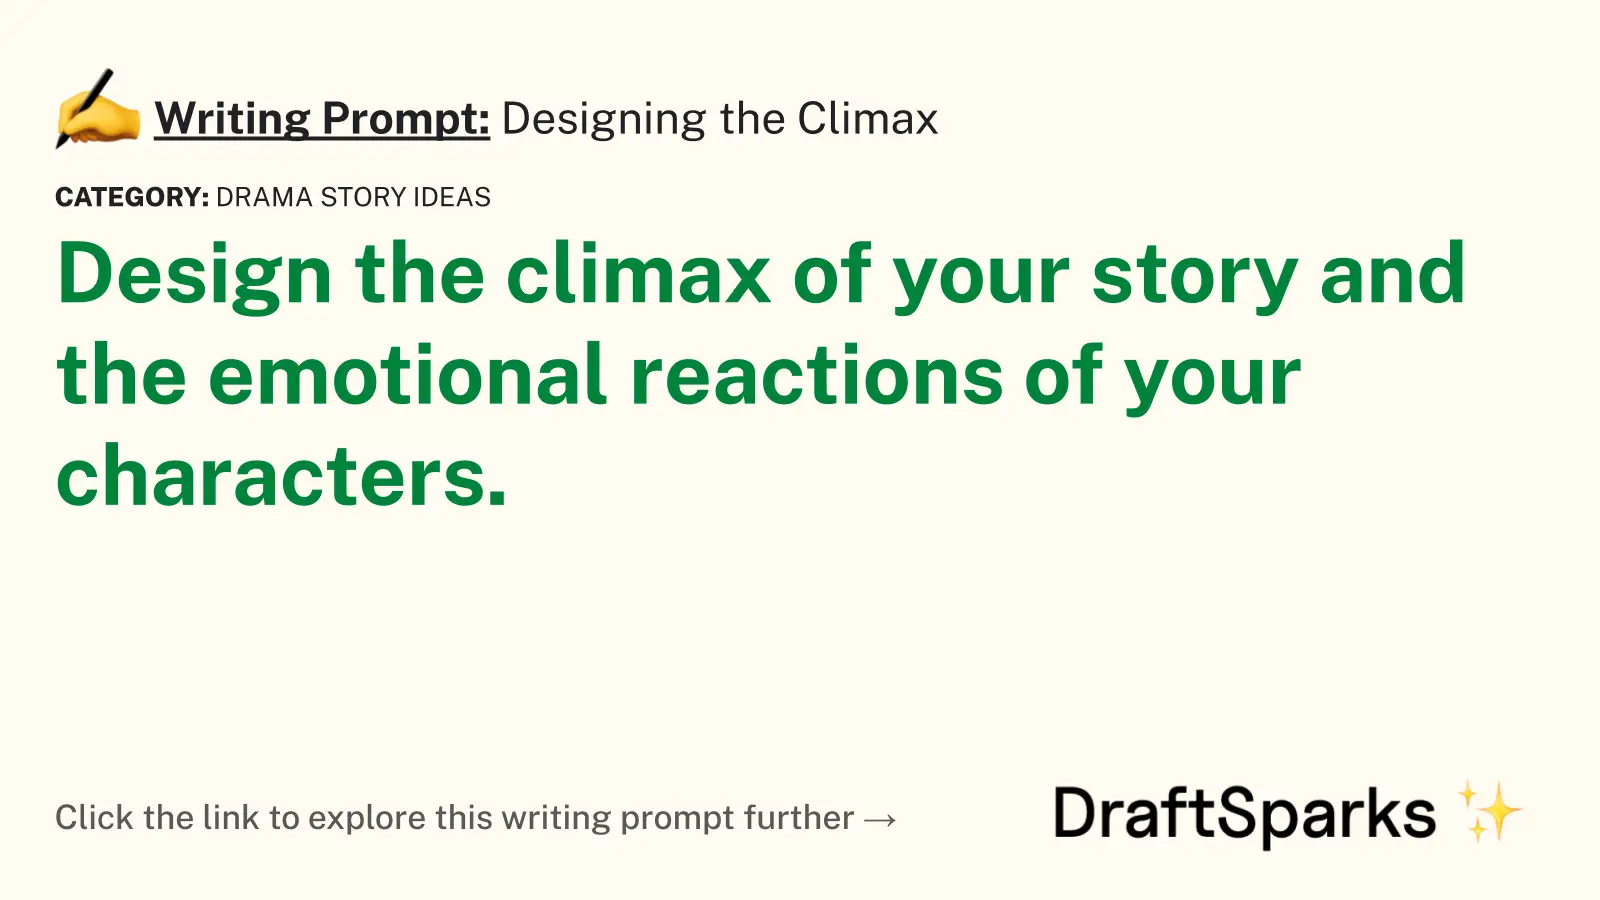 Designing the Climax